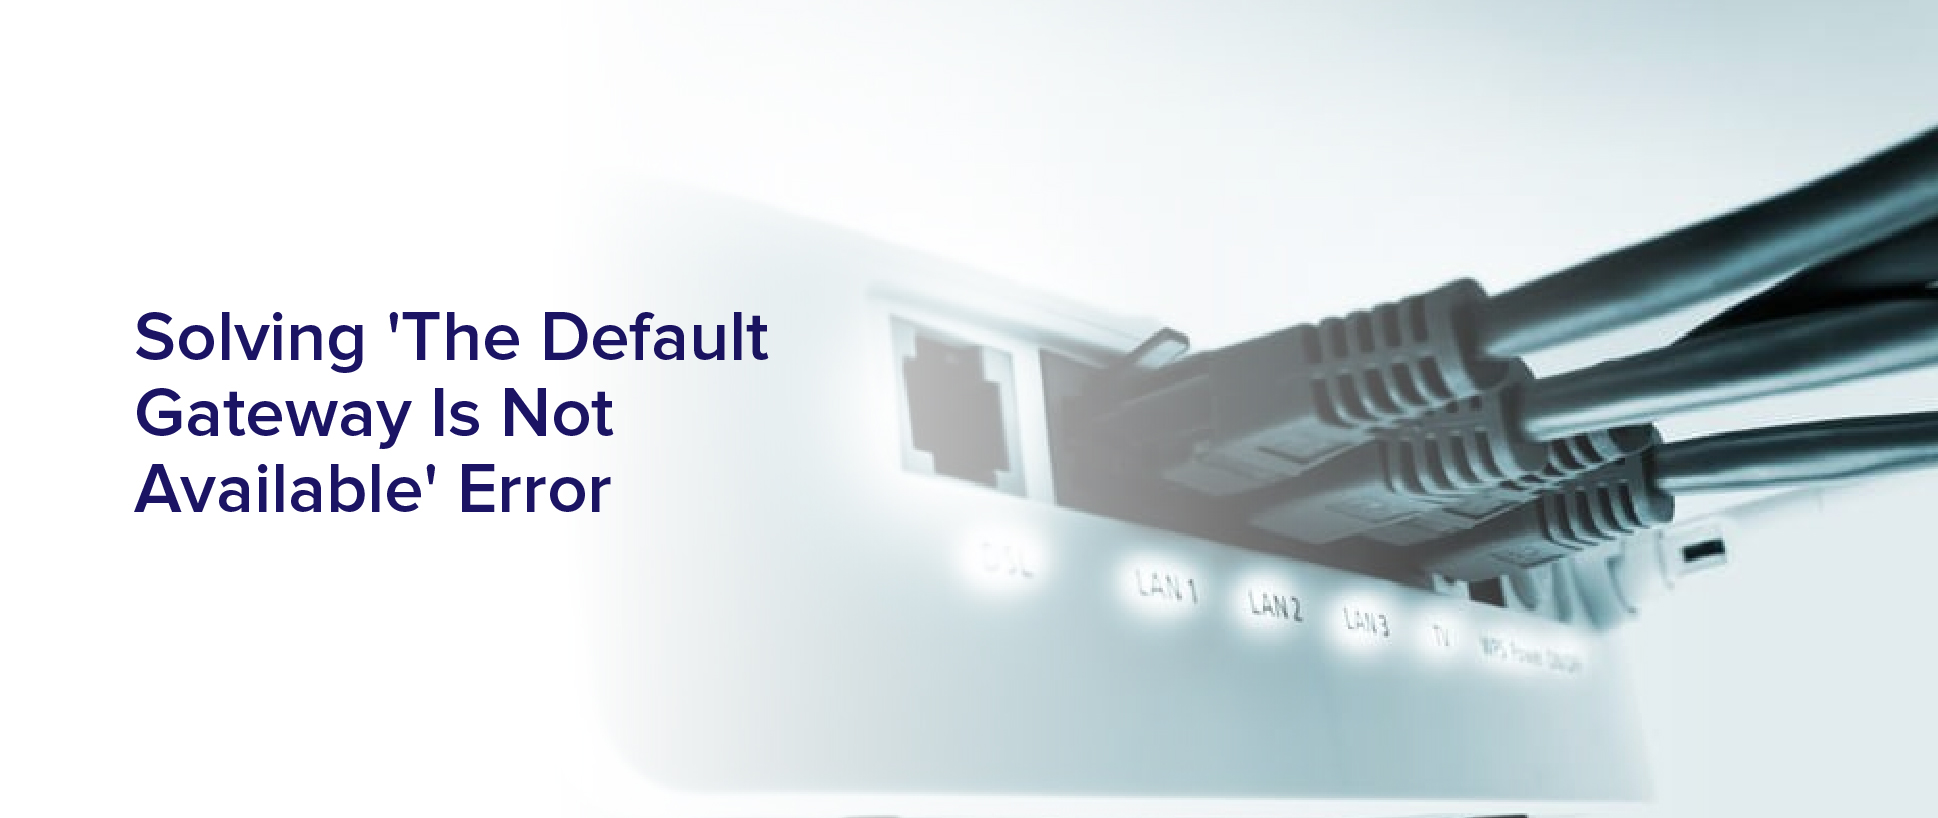 Solving 'The Default Gateway Is Not Available' Error"